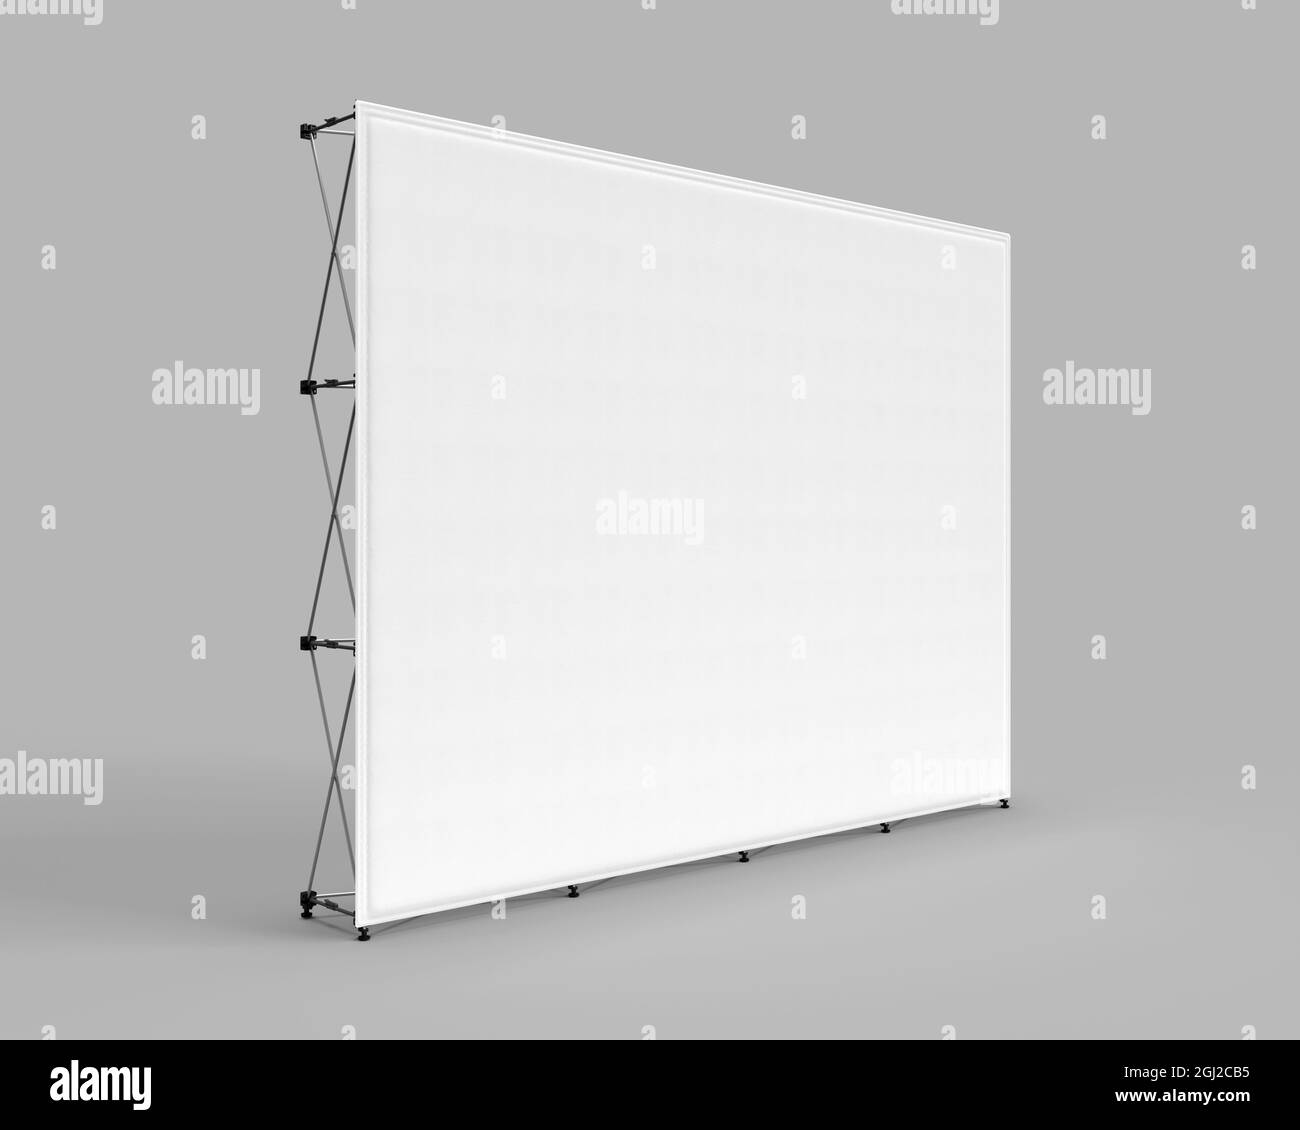 Wall Banner Cloth Exhibition Trade Stand, Photo realistic 3d render visualization of exhibition wall. White cloth skin isolated on grey background. Stock Photo